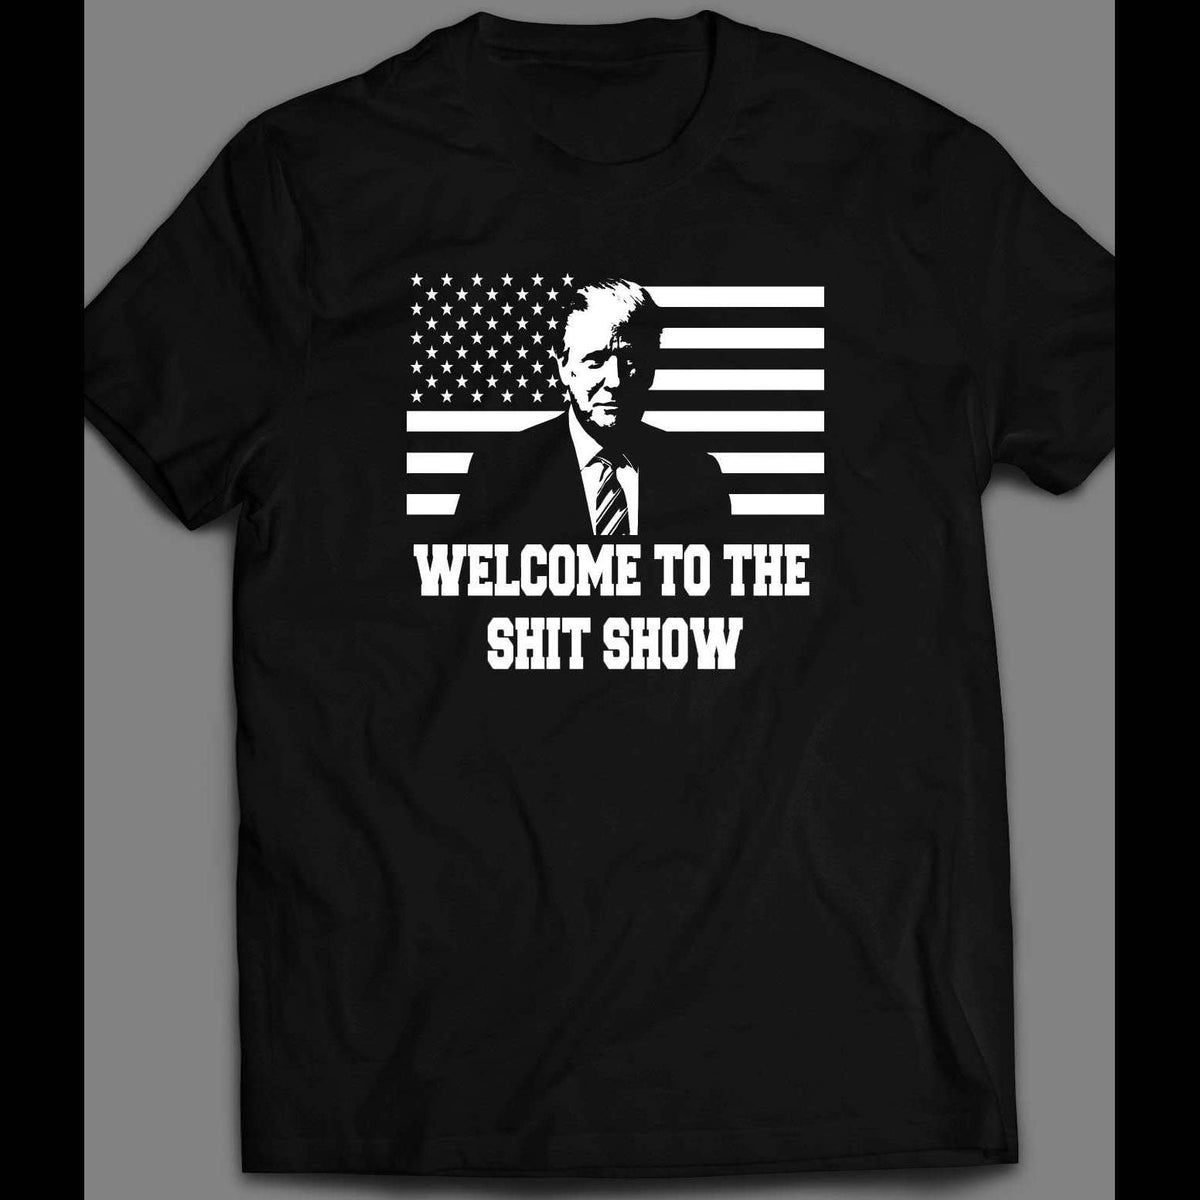 DONALD TRUMP WELCOME TO THE SHIT SHOW T-SHIRT | 80's, 90's to Today Quality Artistic ...